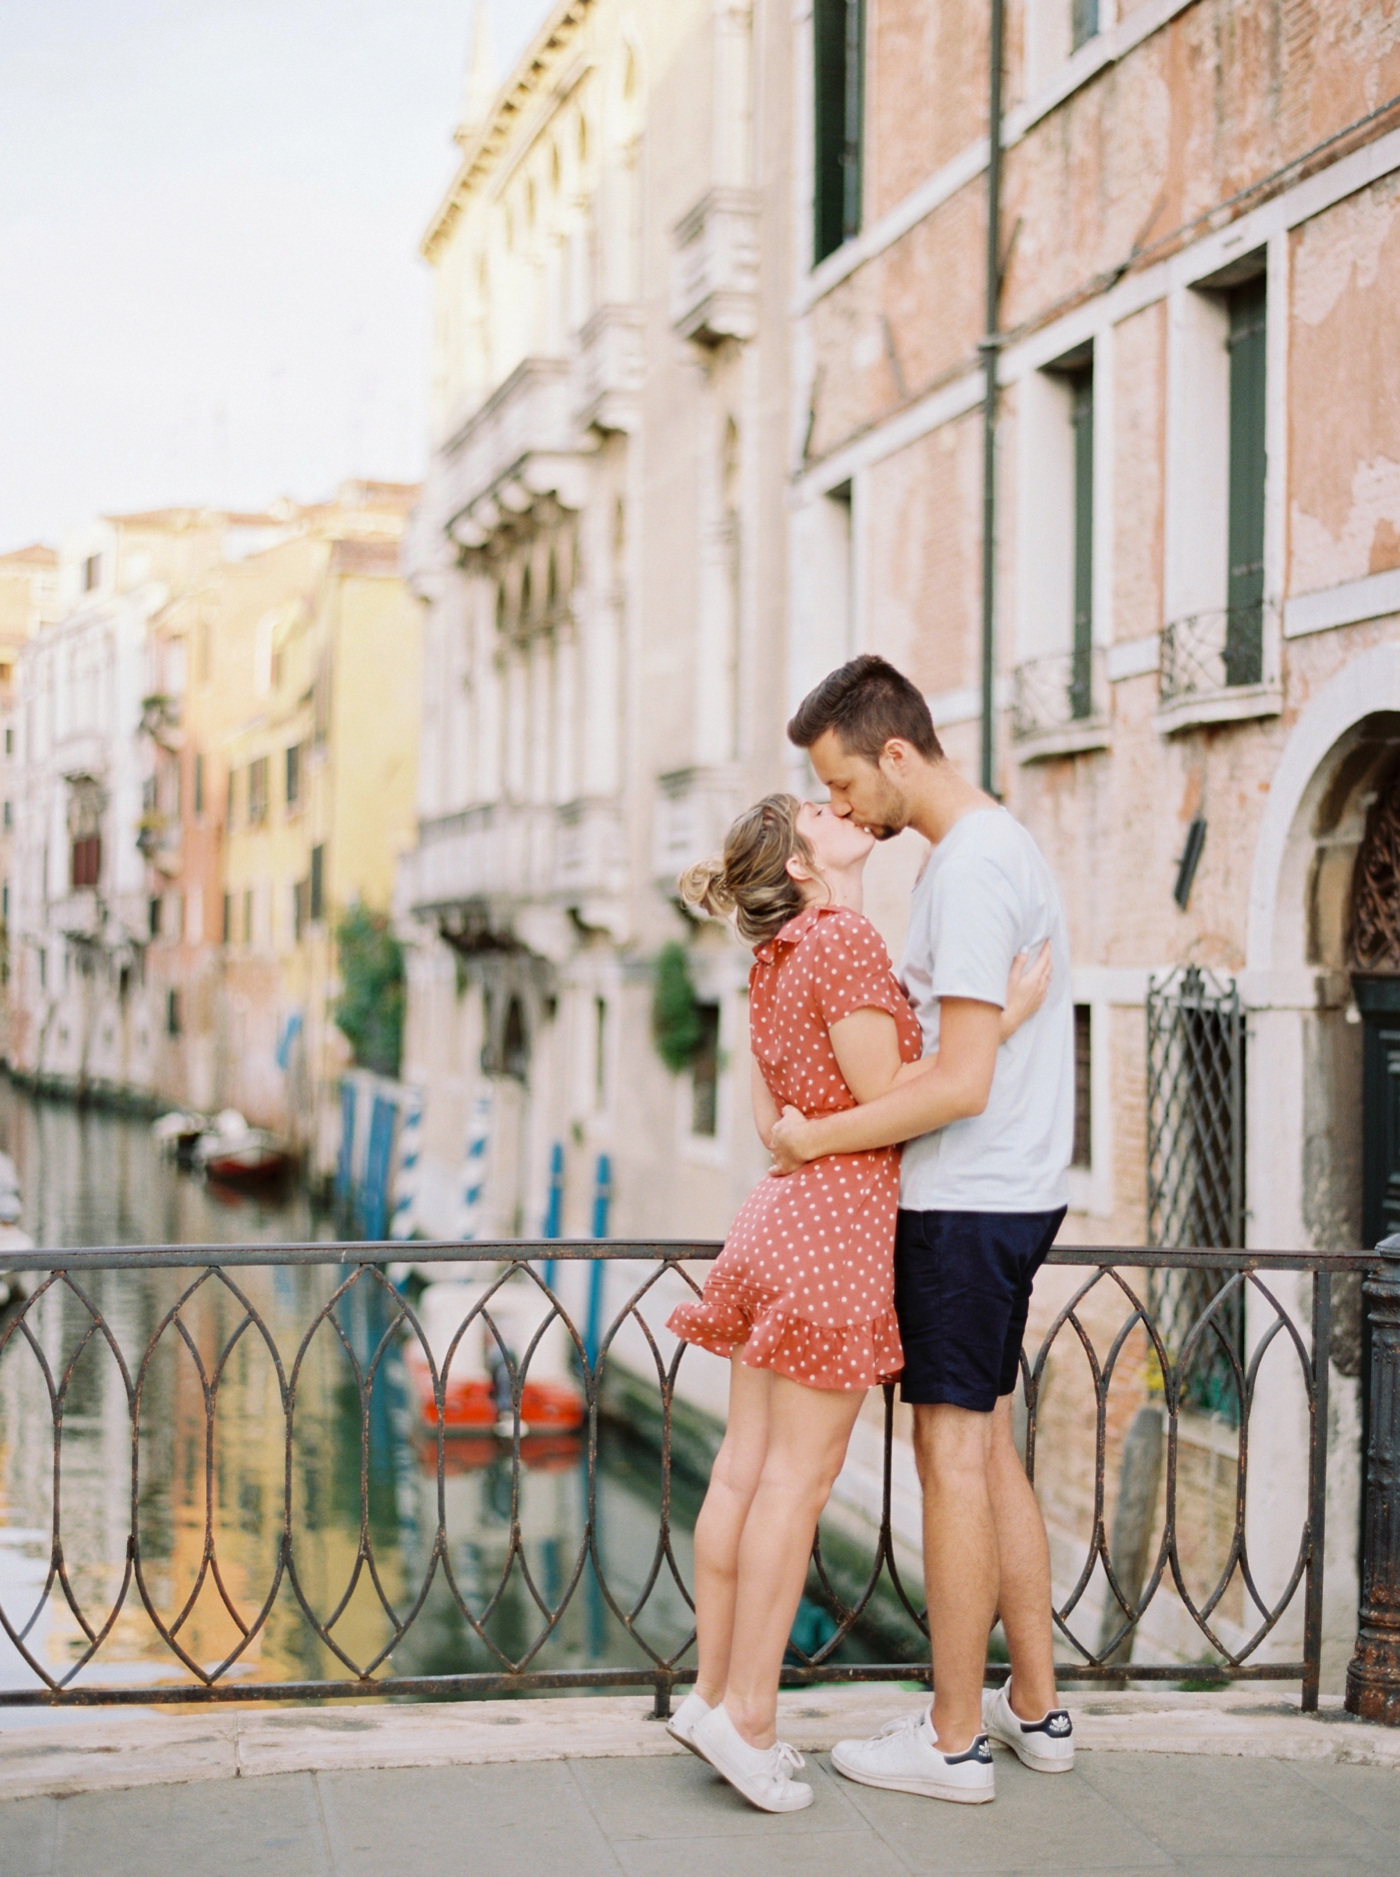 fashion and travel bloggers in Venice italy | couples photo session venice canals italy with Justine milton film photography